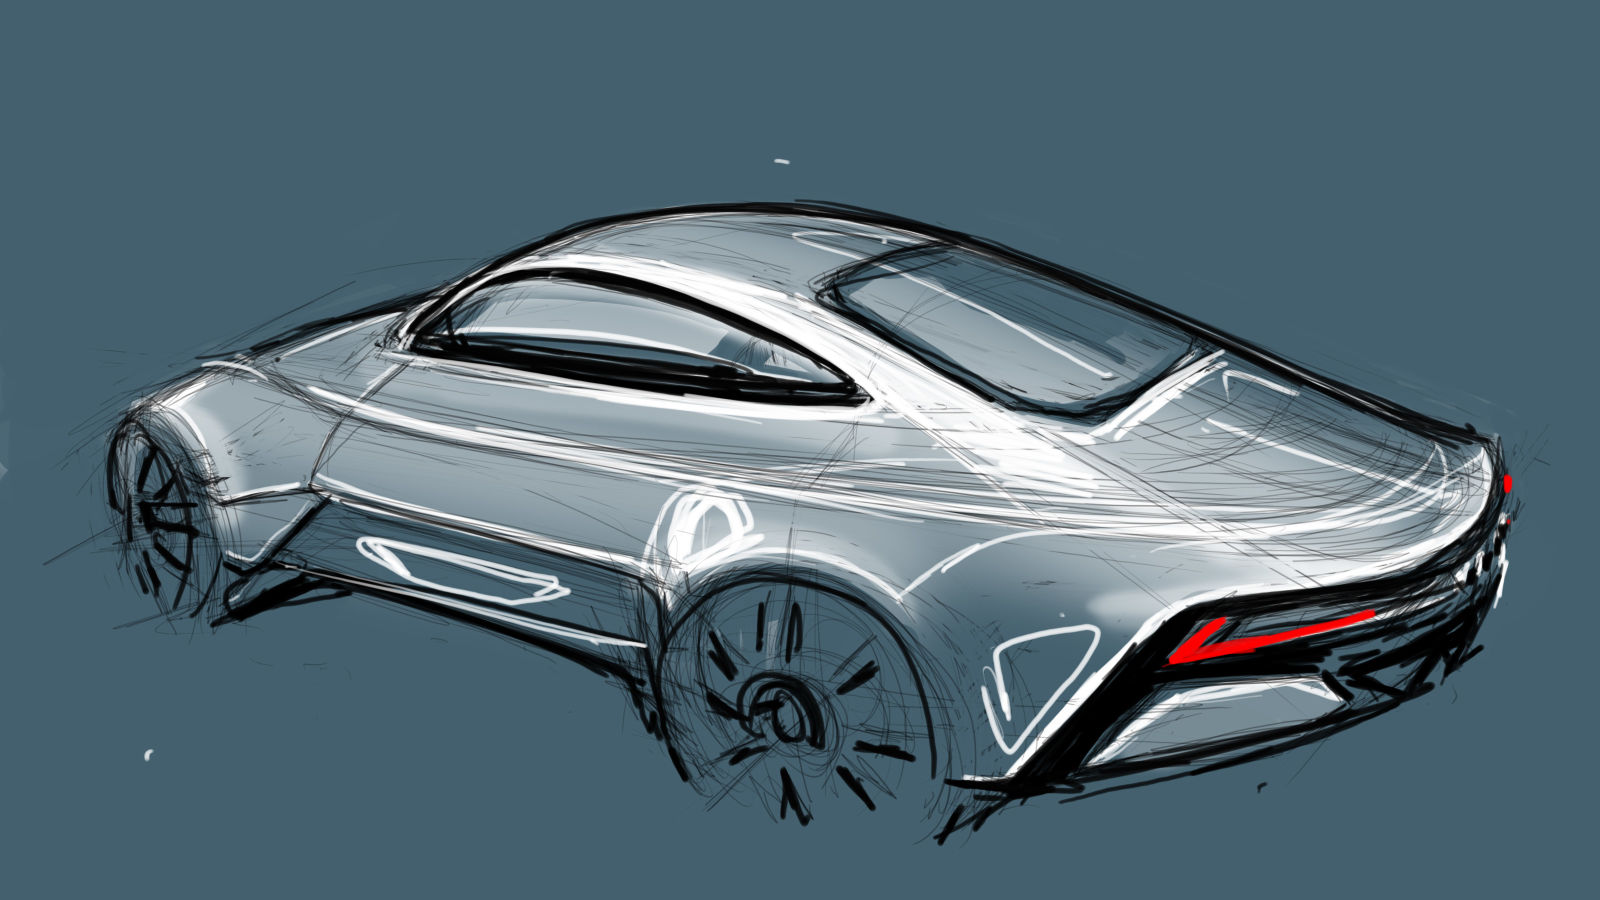 Illustration for article titled An electric TT, another sick-recovery sketch